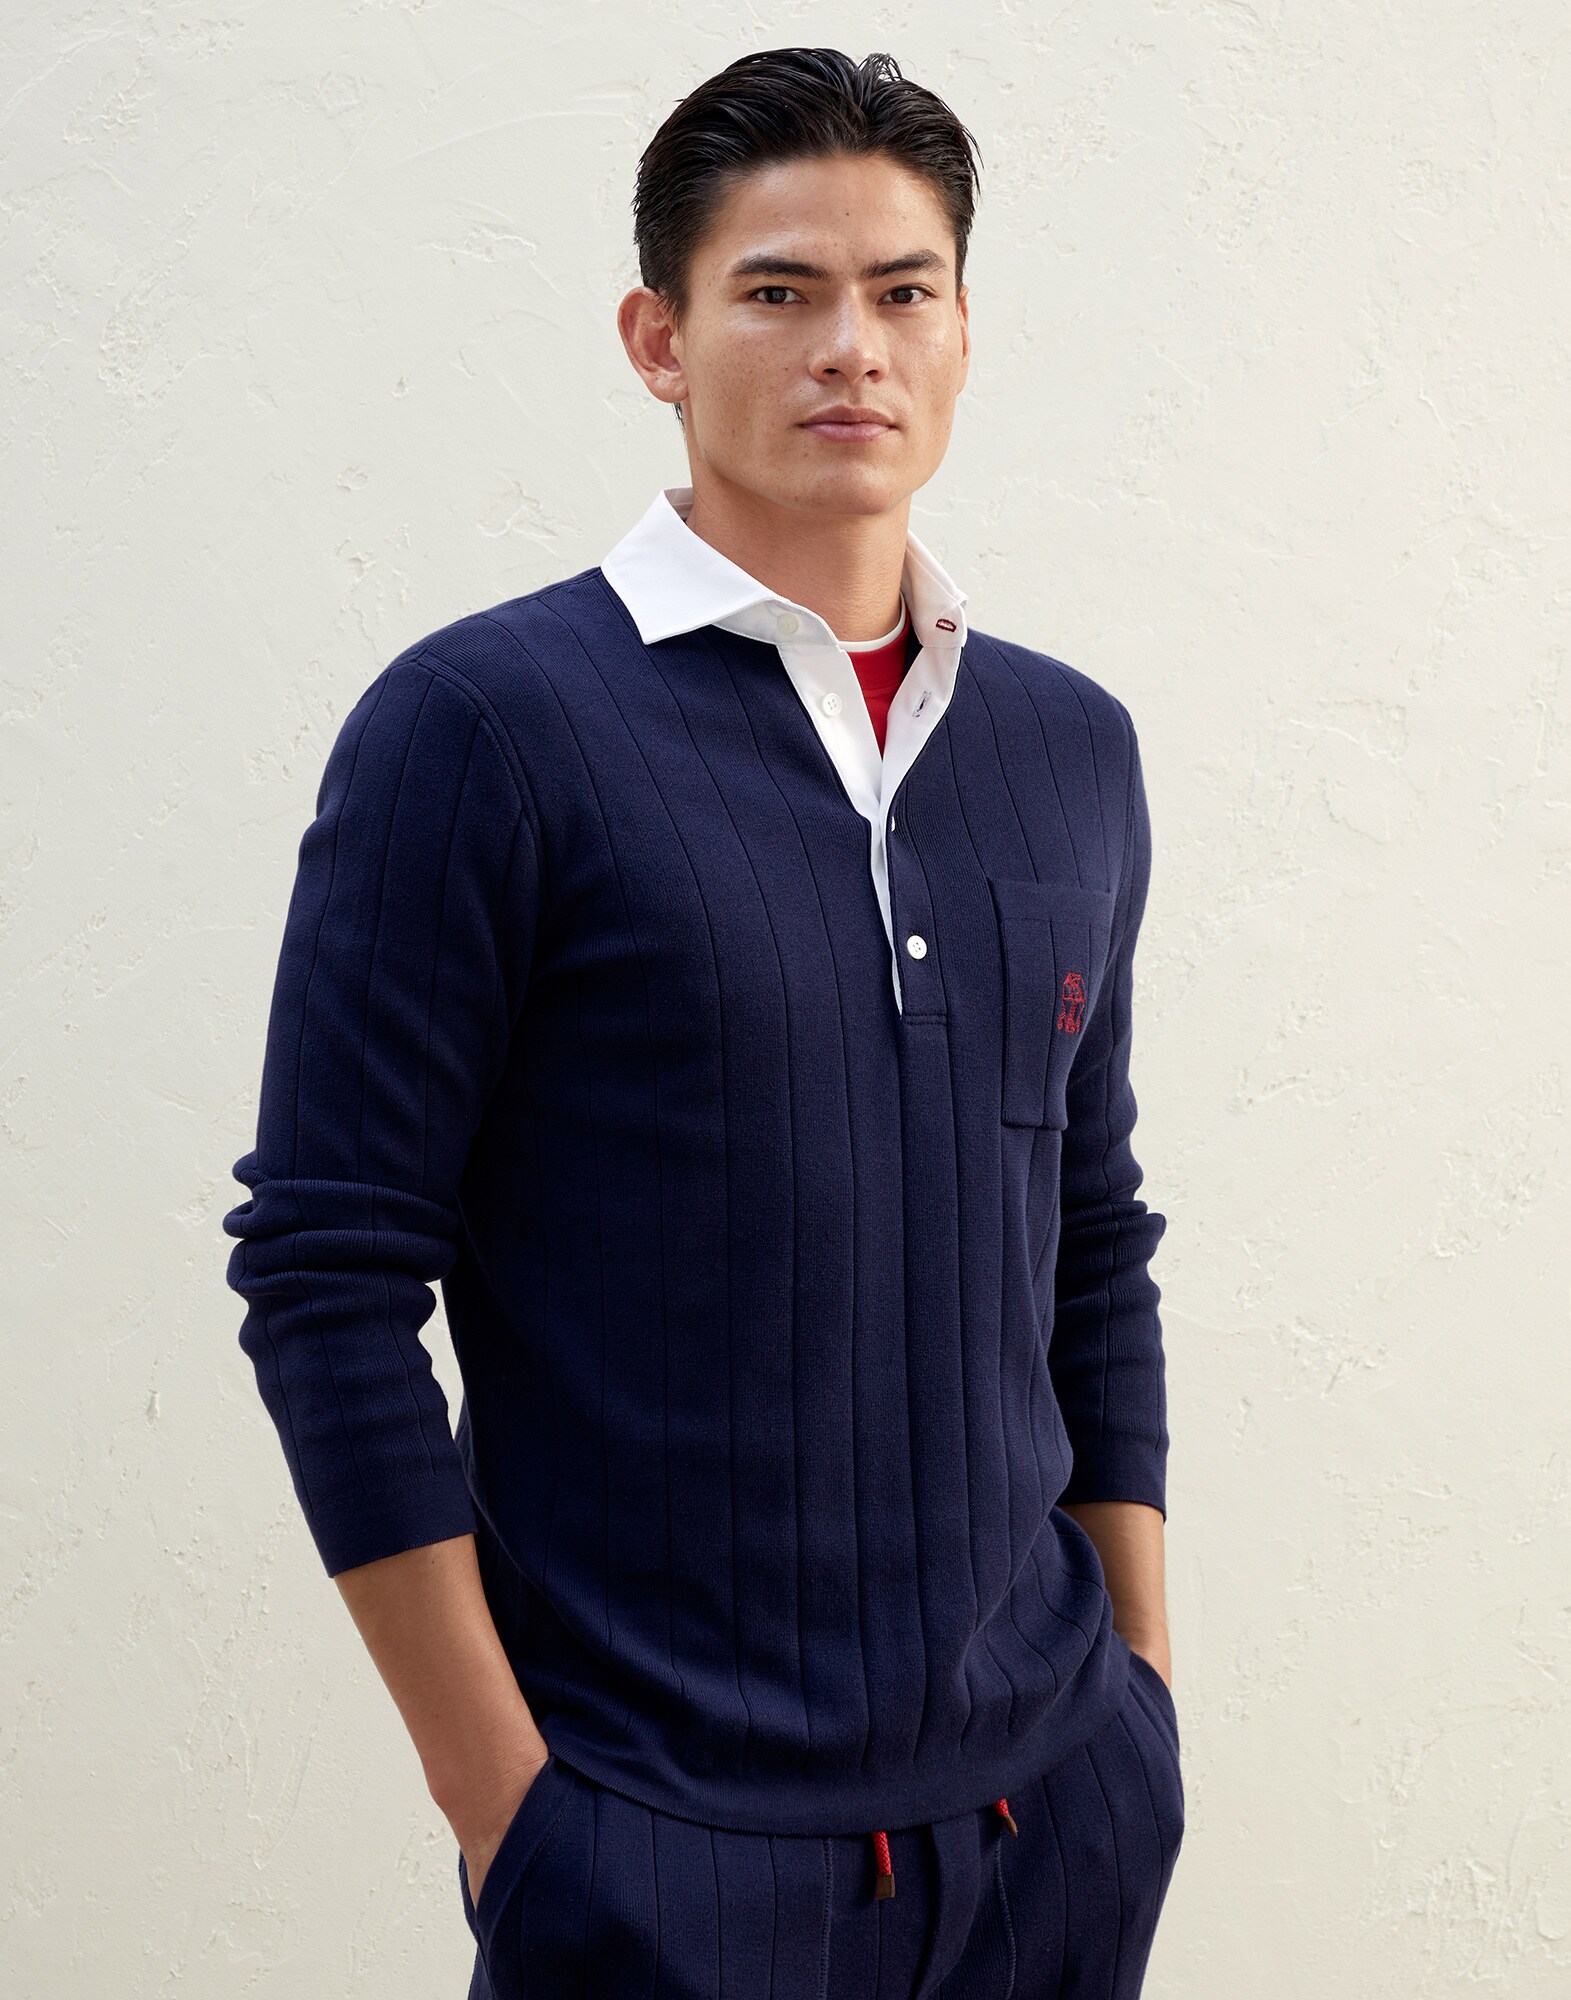 Polo-style sweater